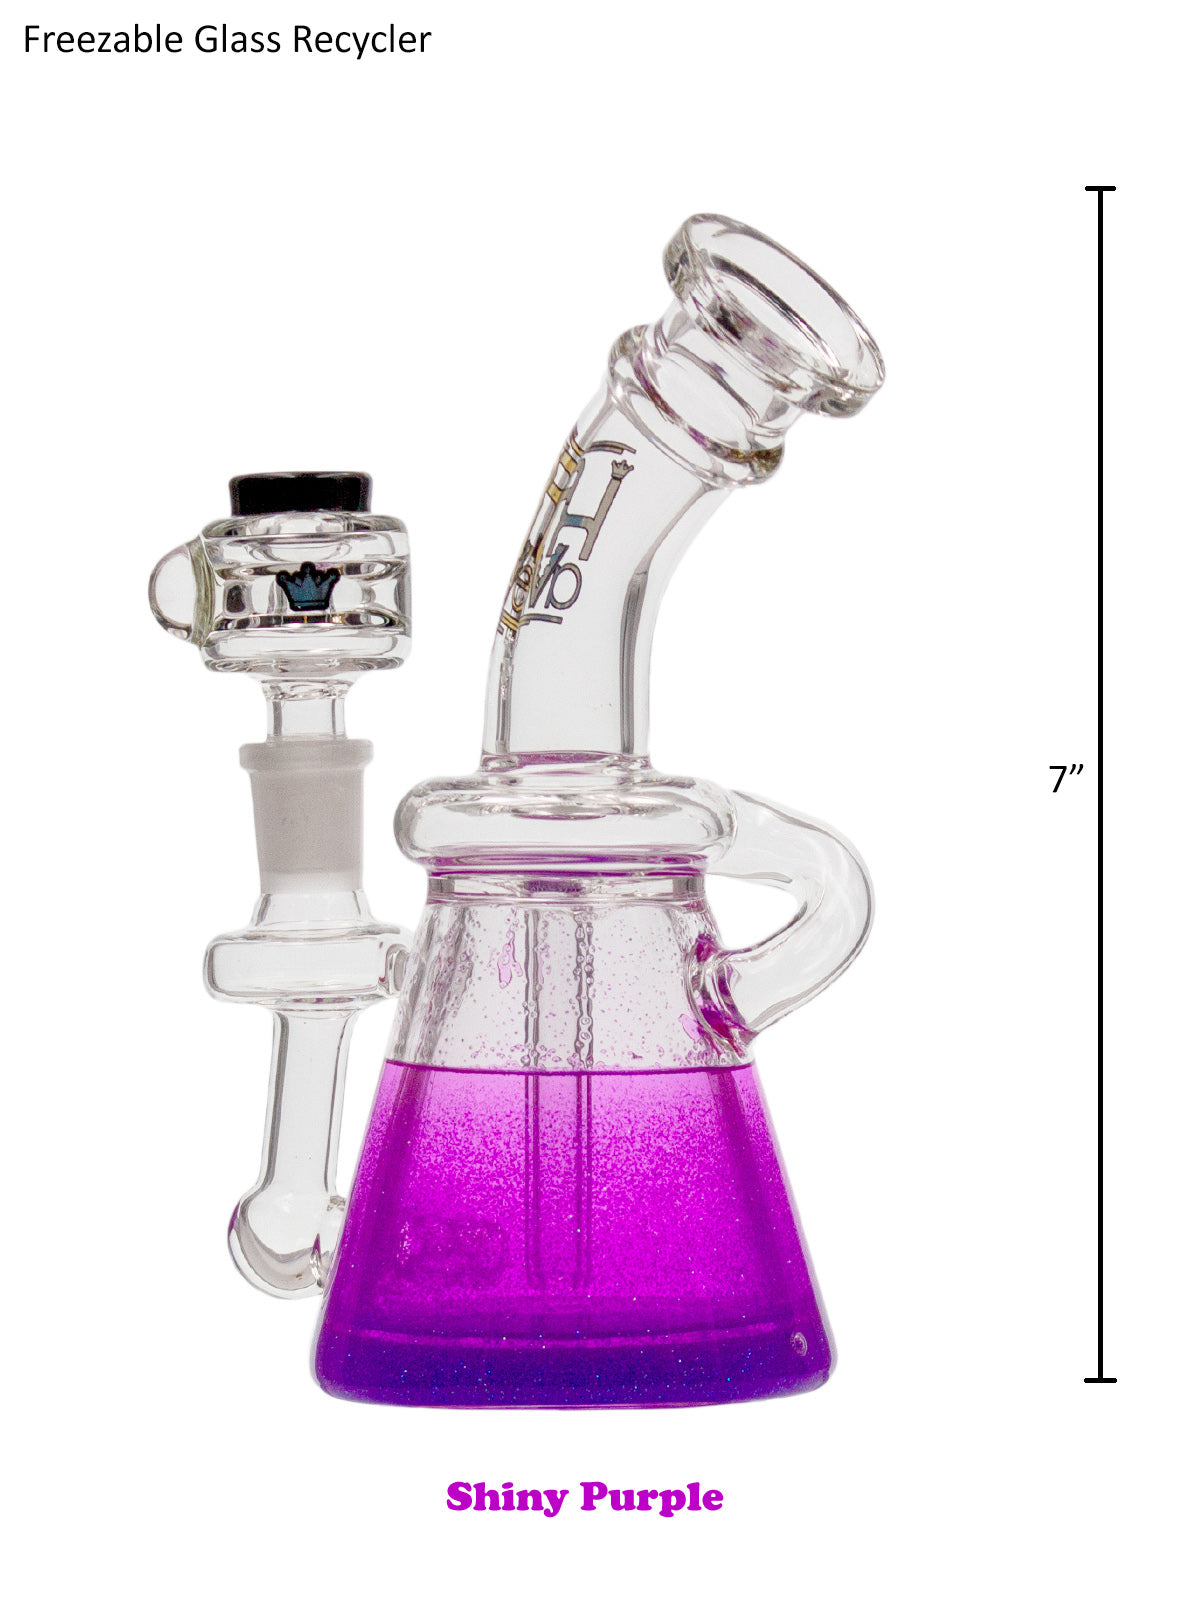 Krave Glass FreezeCYCLER BH * FREE GIFT*